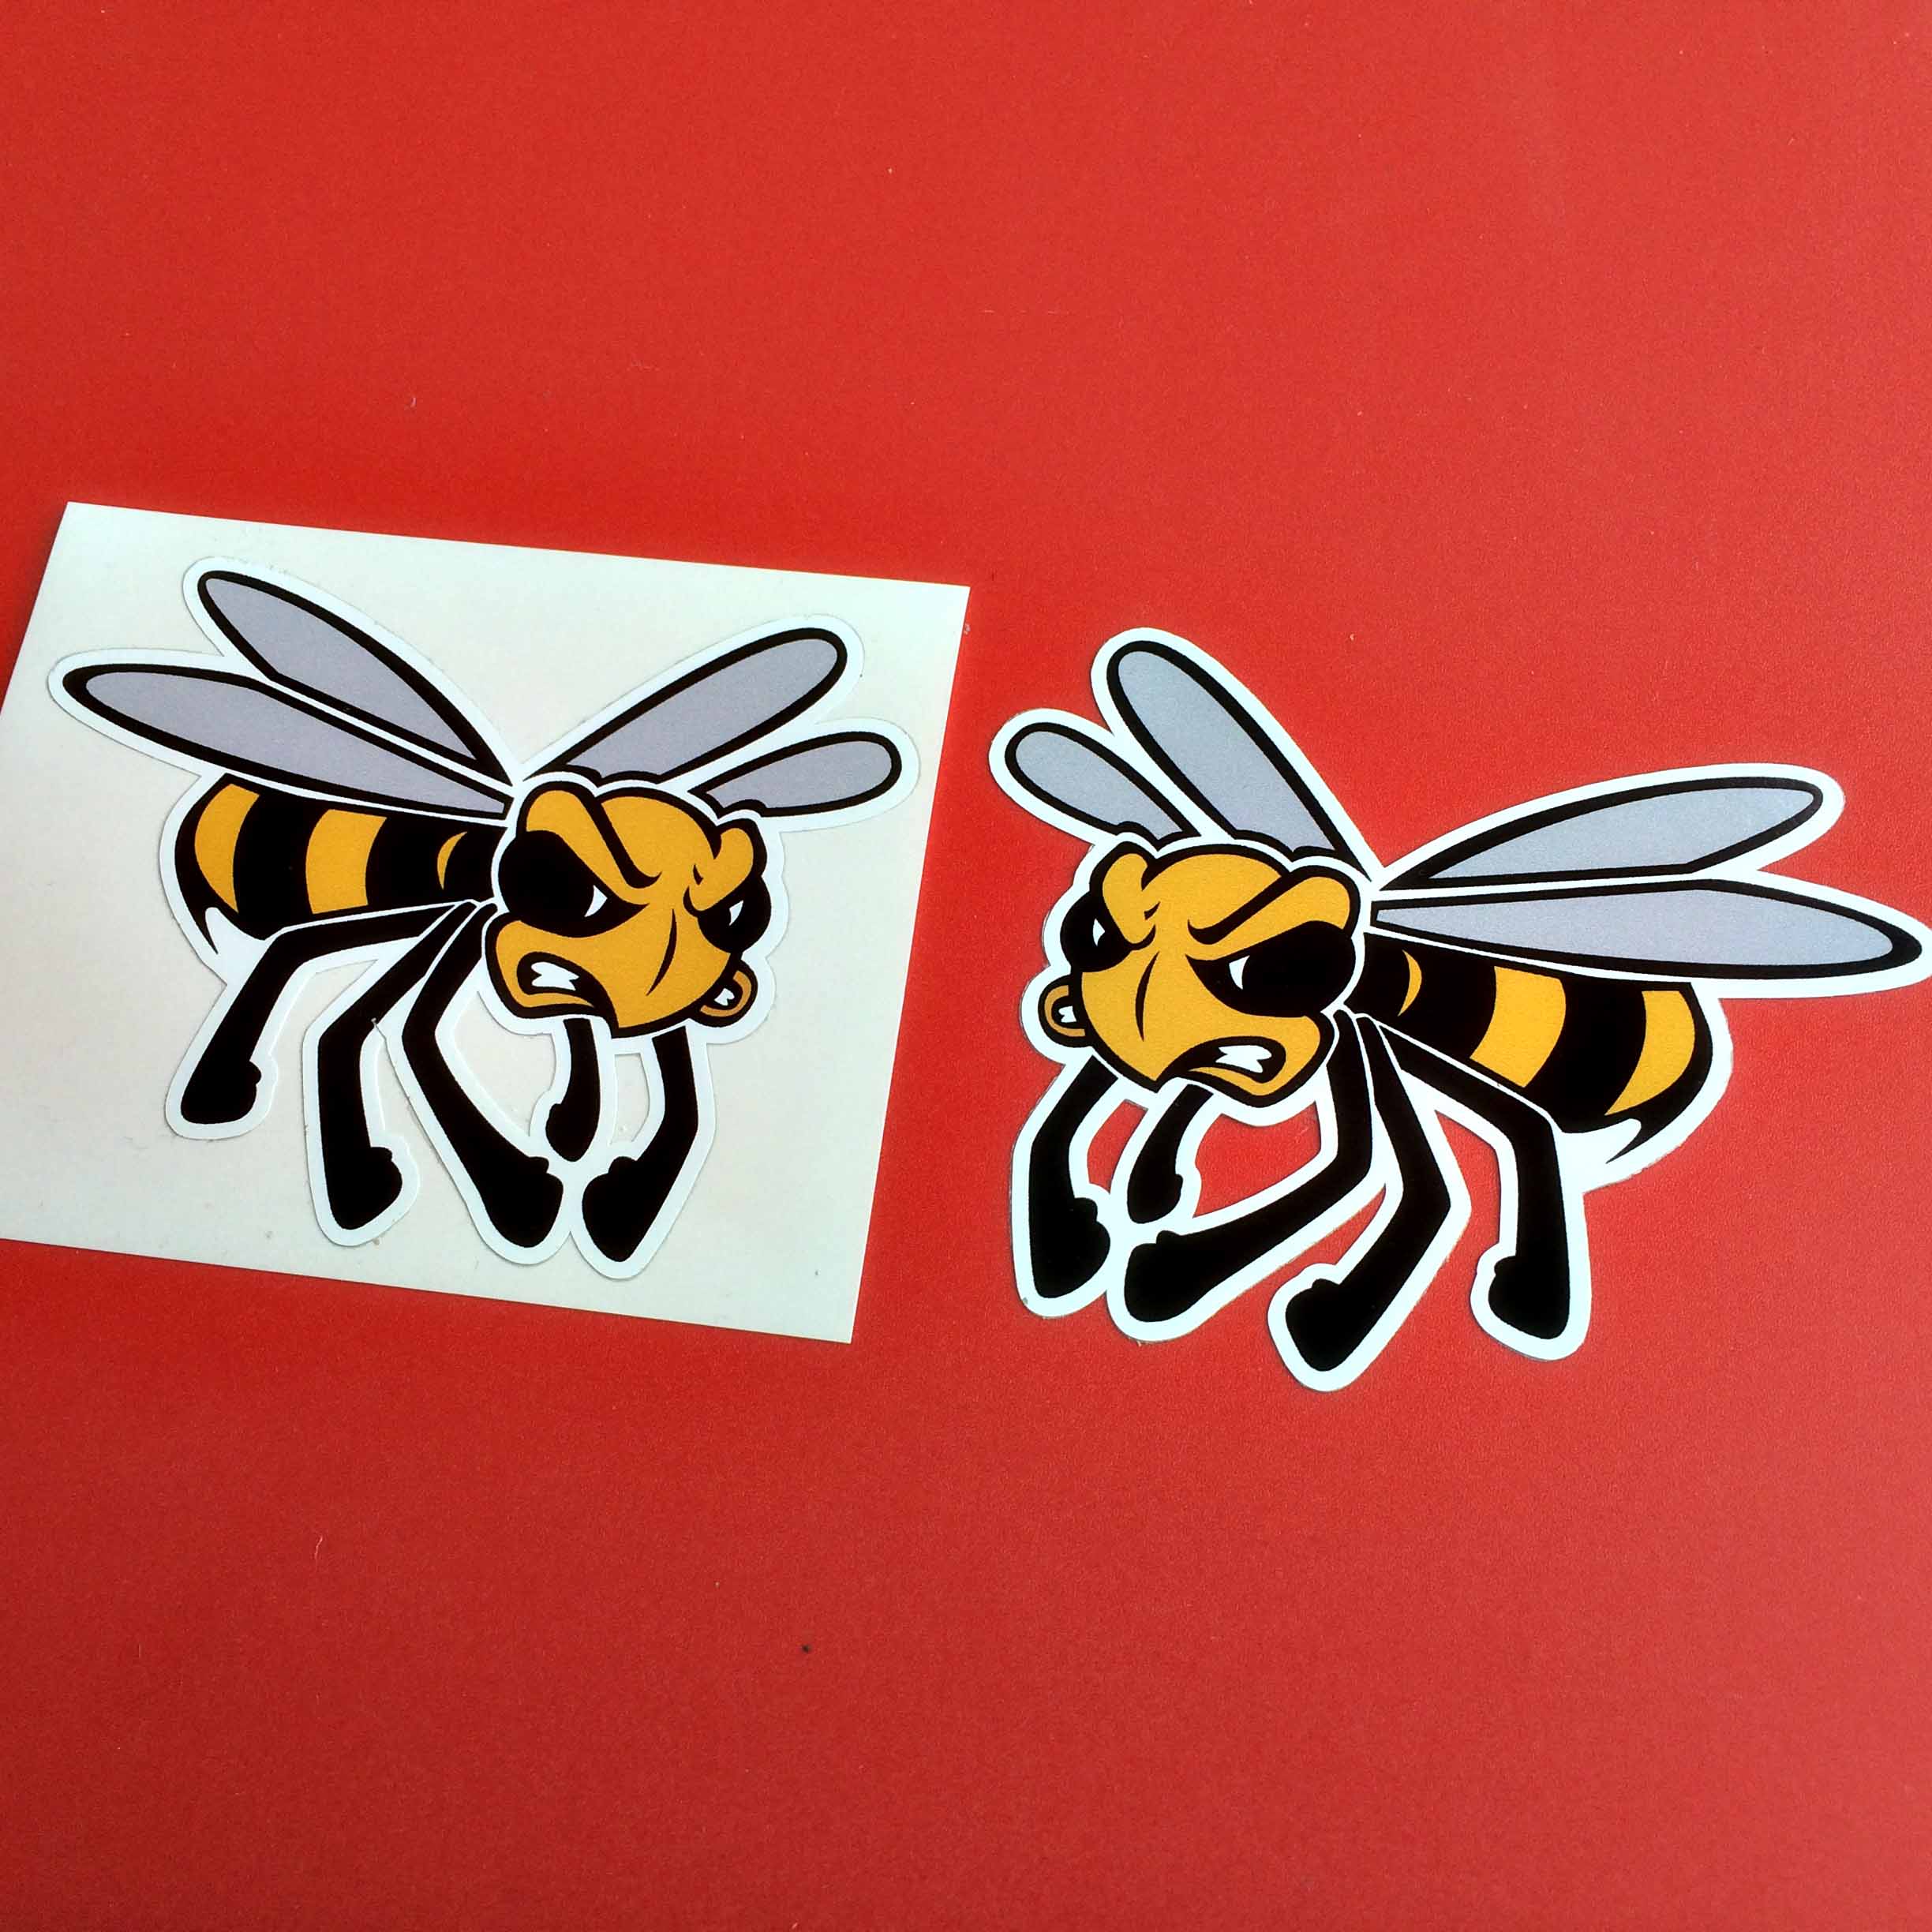 ANGRY WASP STICKERS WITH LEGS. A black and yellow wasp in flight. Displaying wings and legs. It has an angry face.